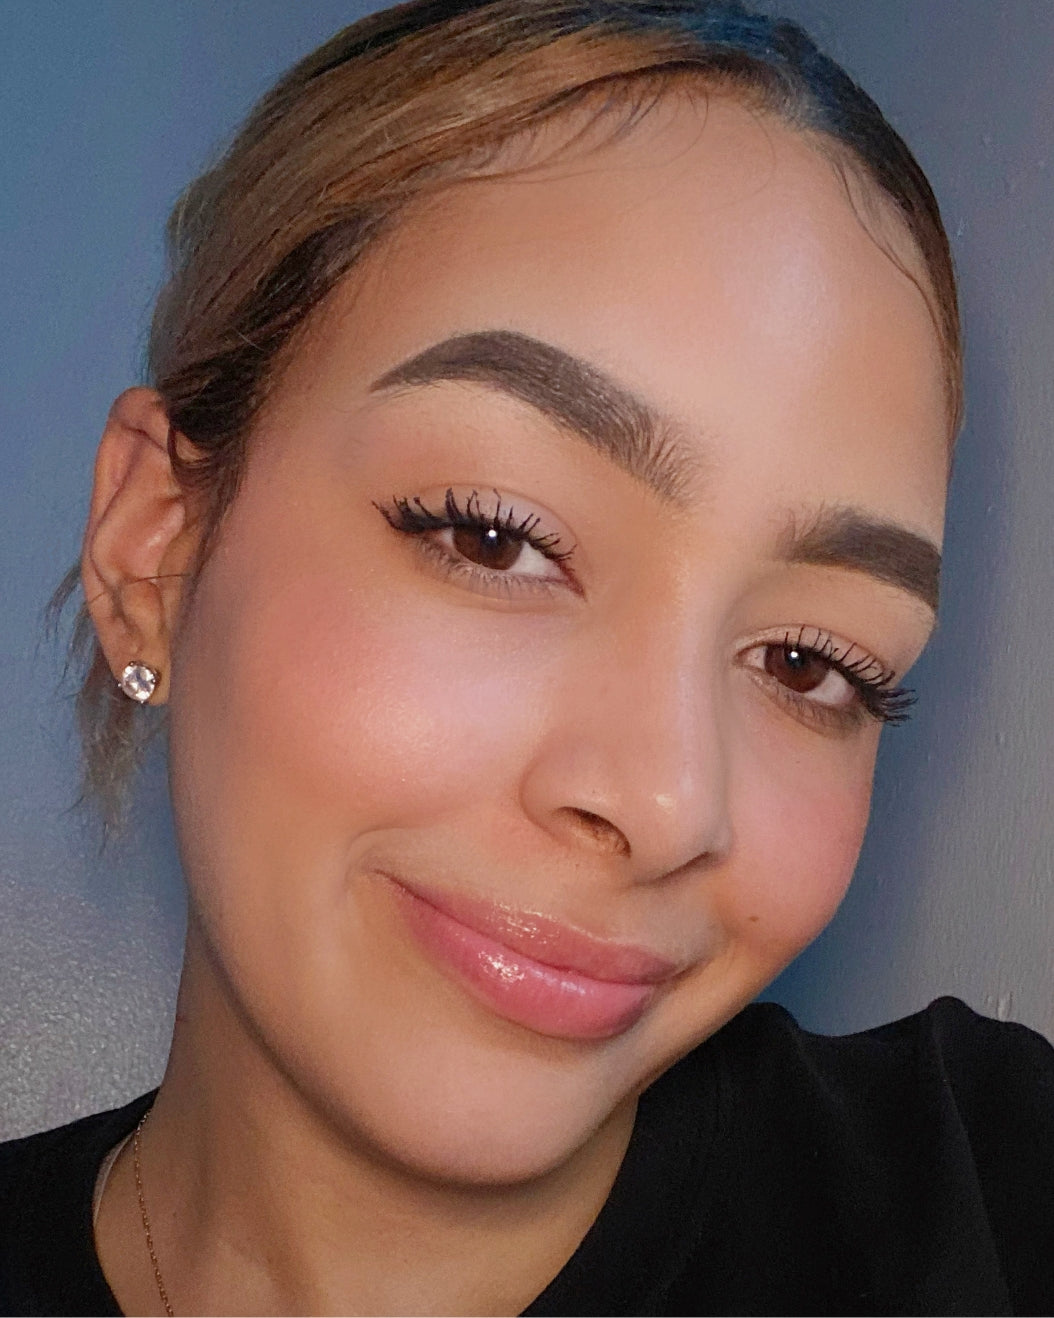 Makeup artist wearing a makeup look with defined, fluffy brows for a back-to-school makeup look.